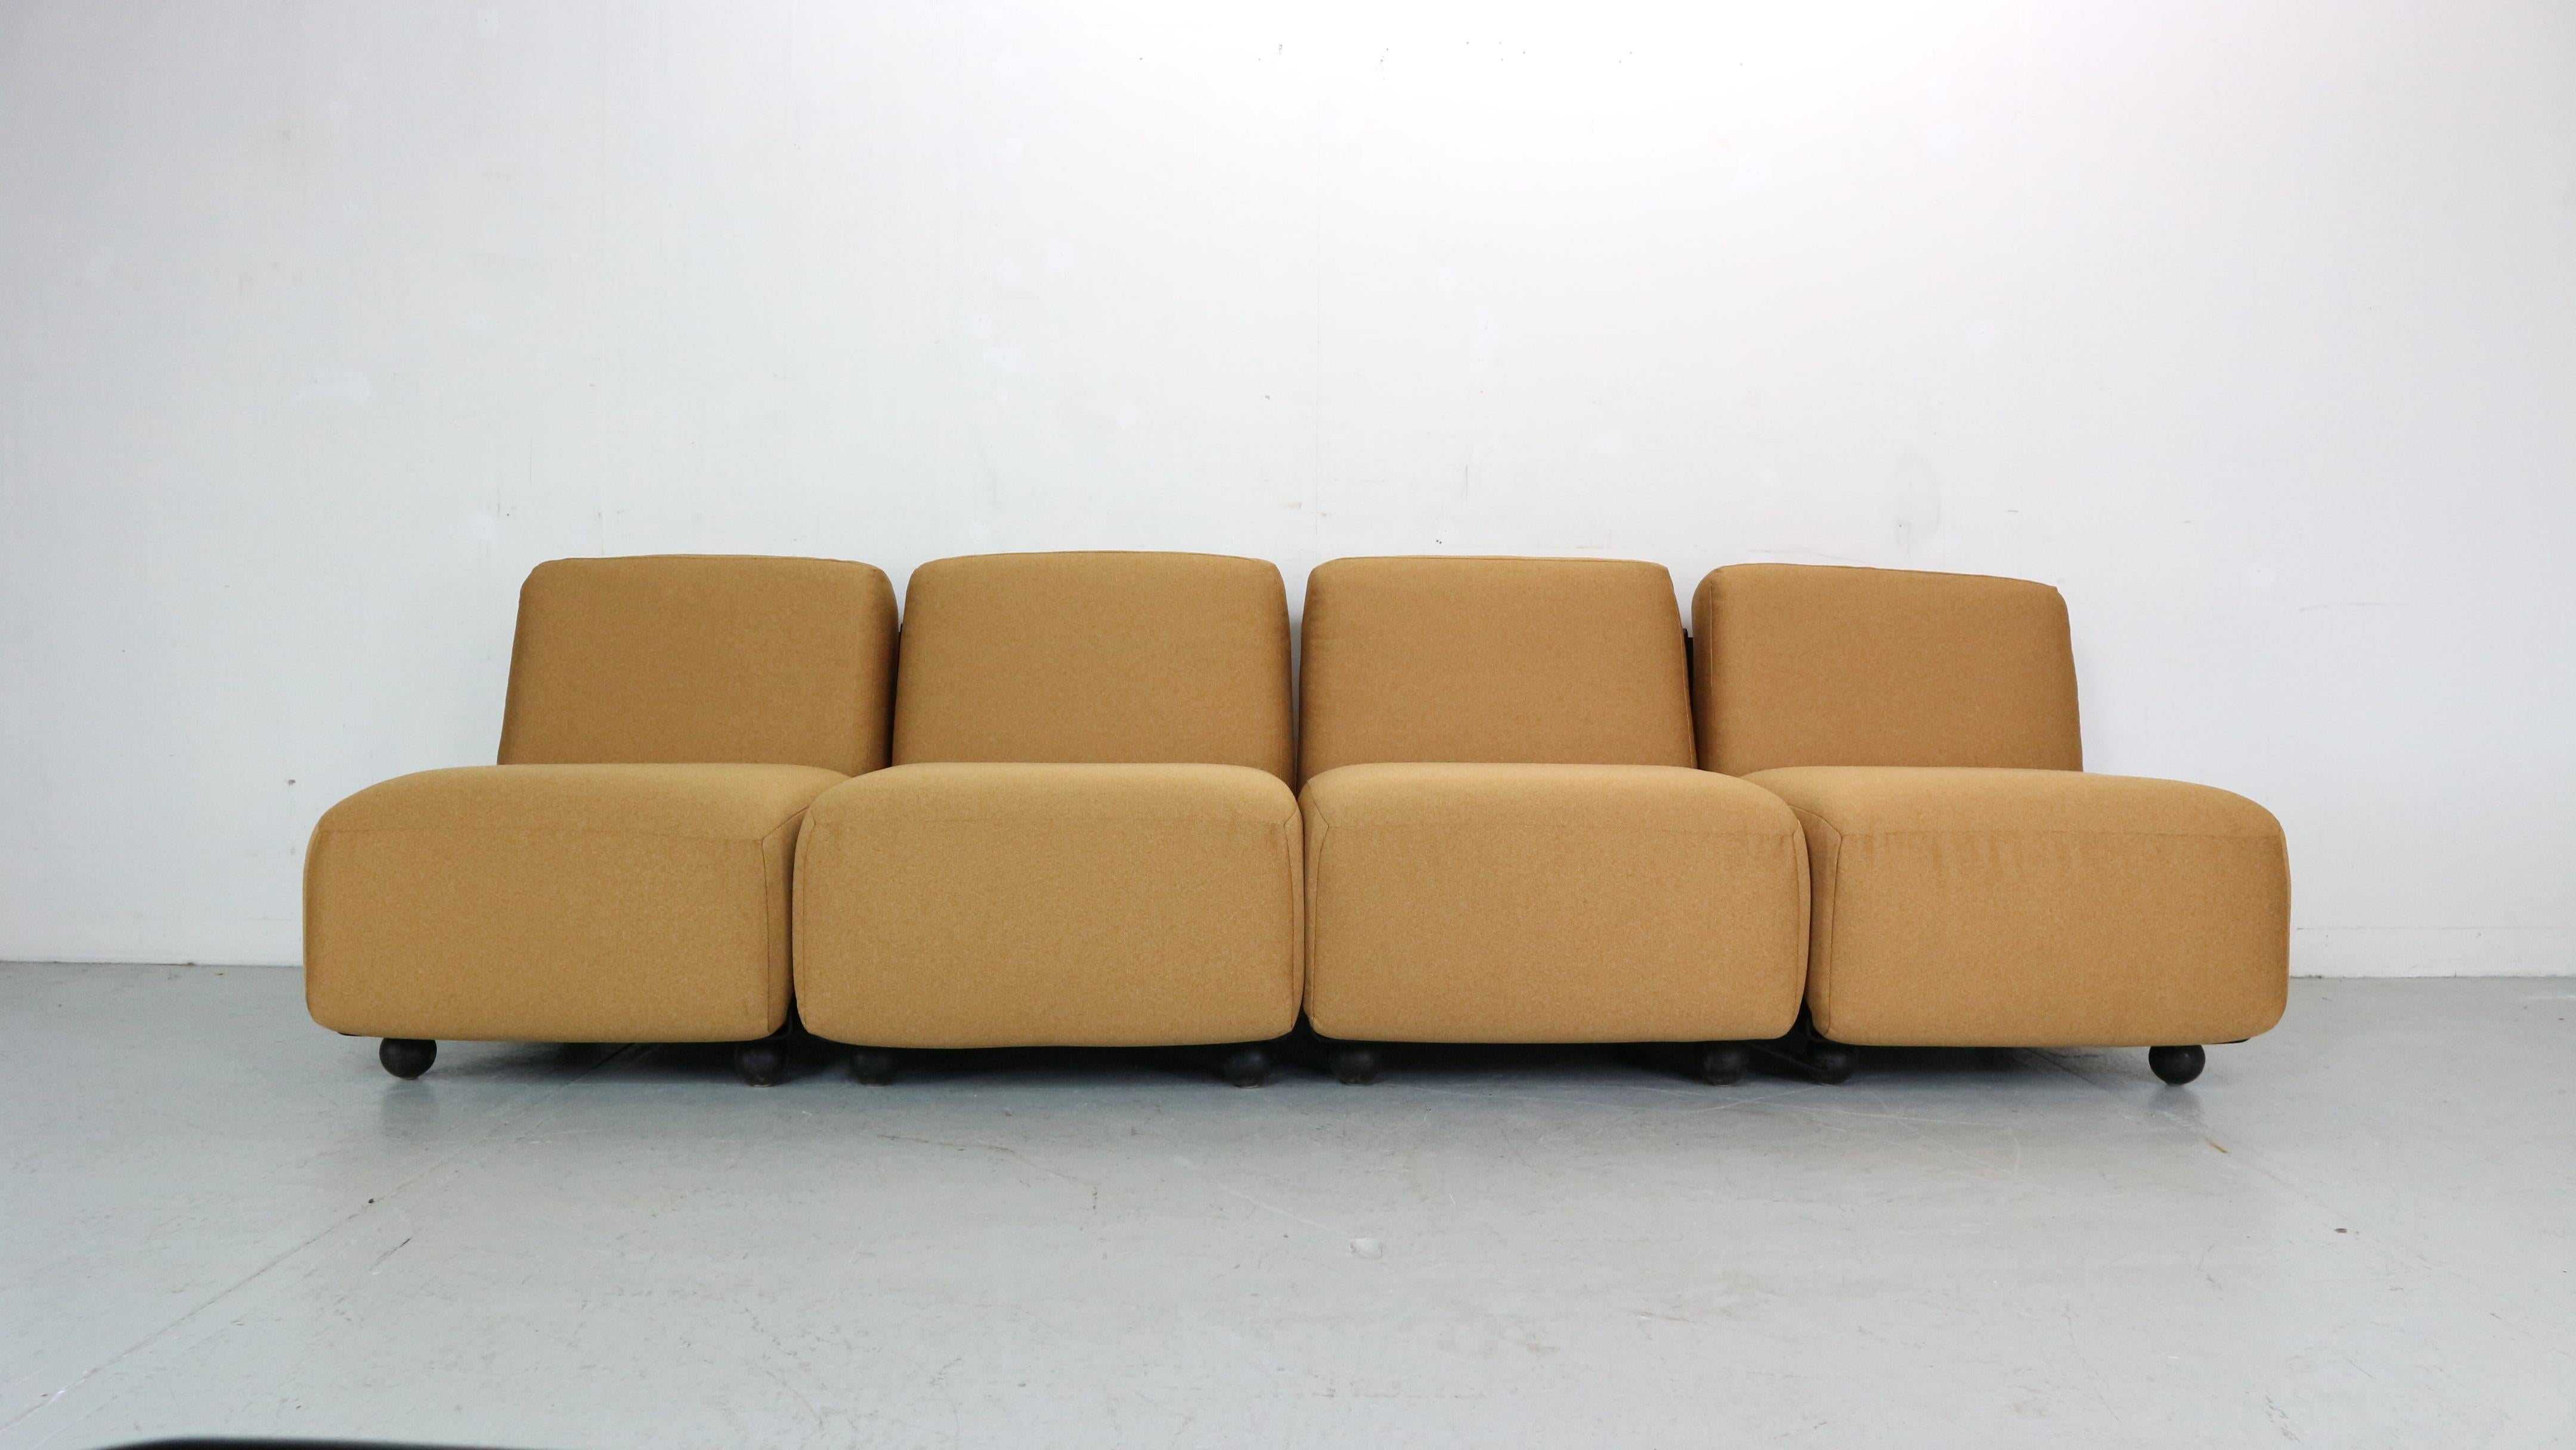 Italian Amanta 24 Chairs by Mario Bellini for C&B, 1970s For Sale 2